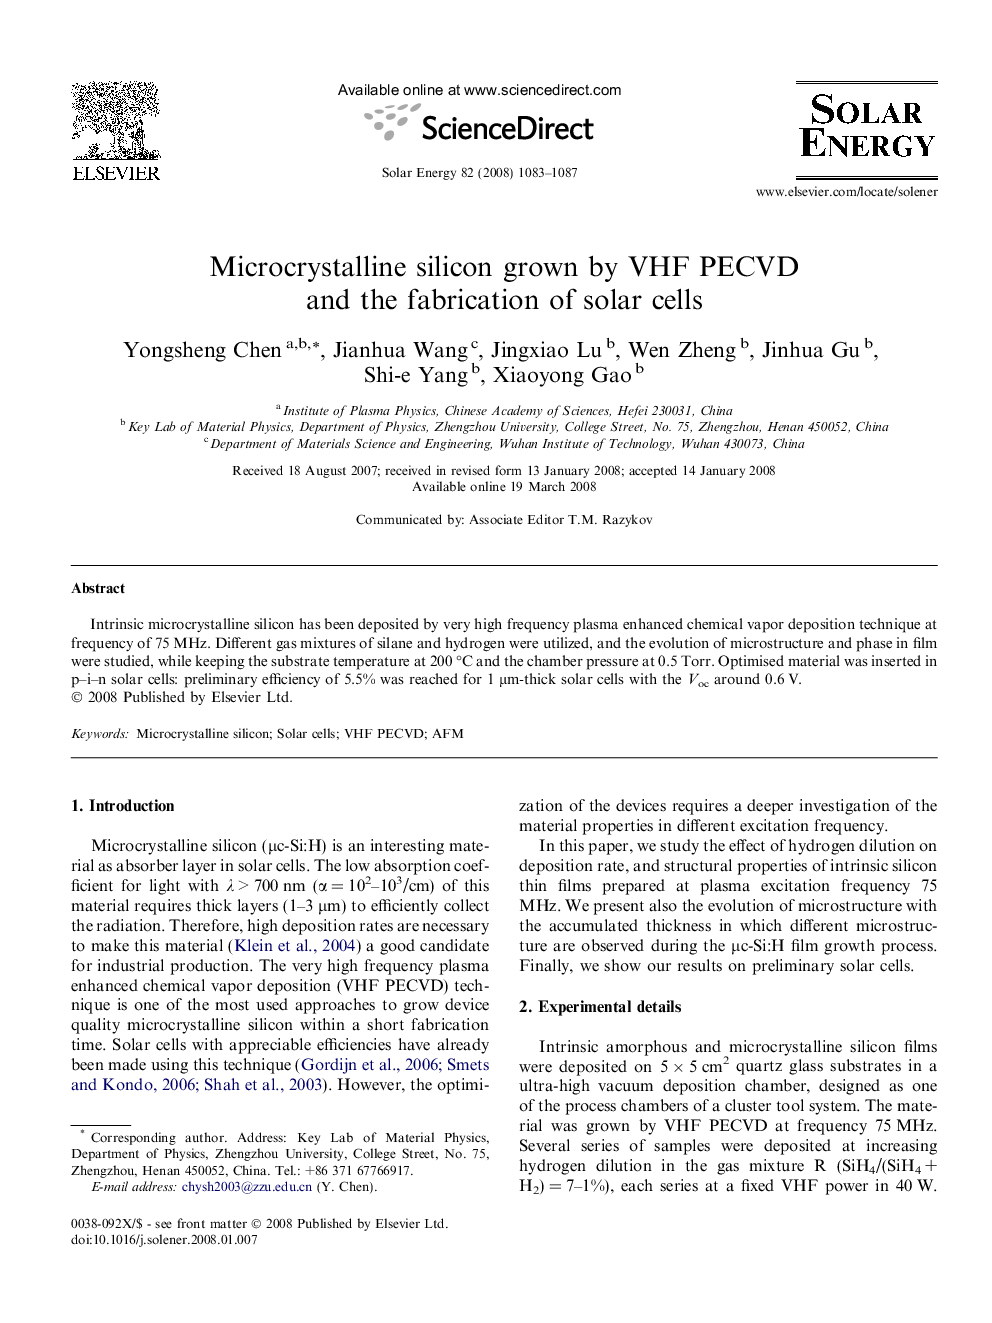 Microcrystalline silicon grown by VHF PECVD and the fabrication of solar cells